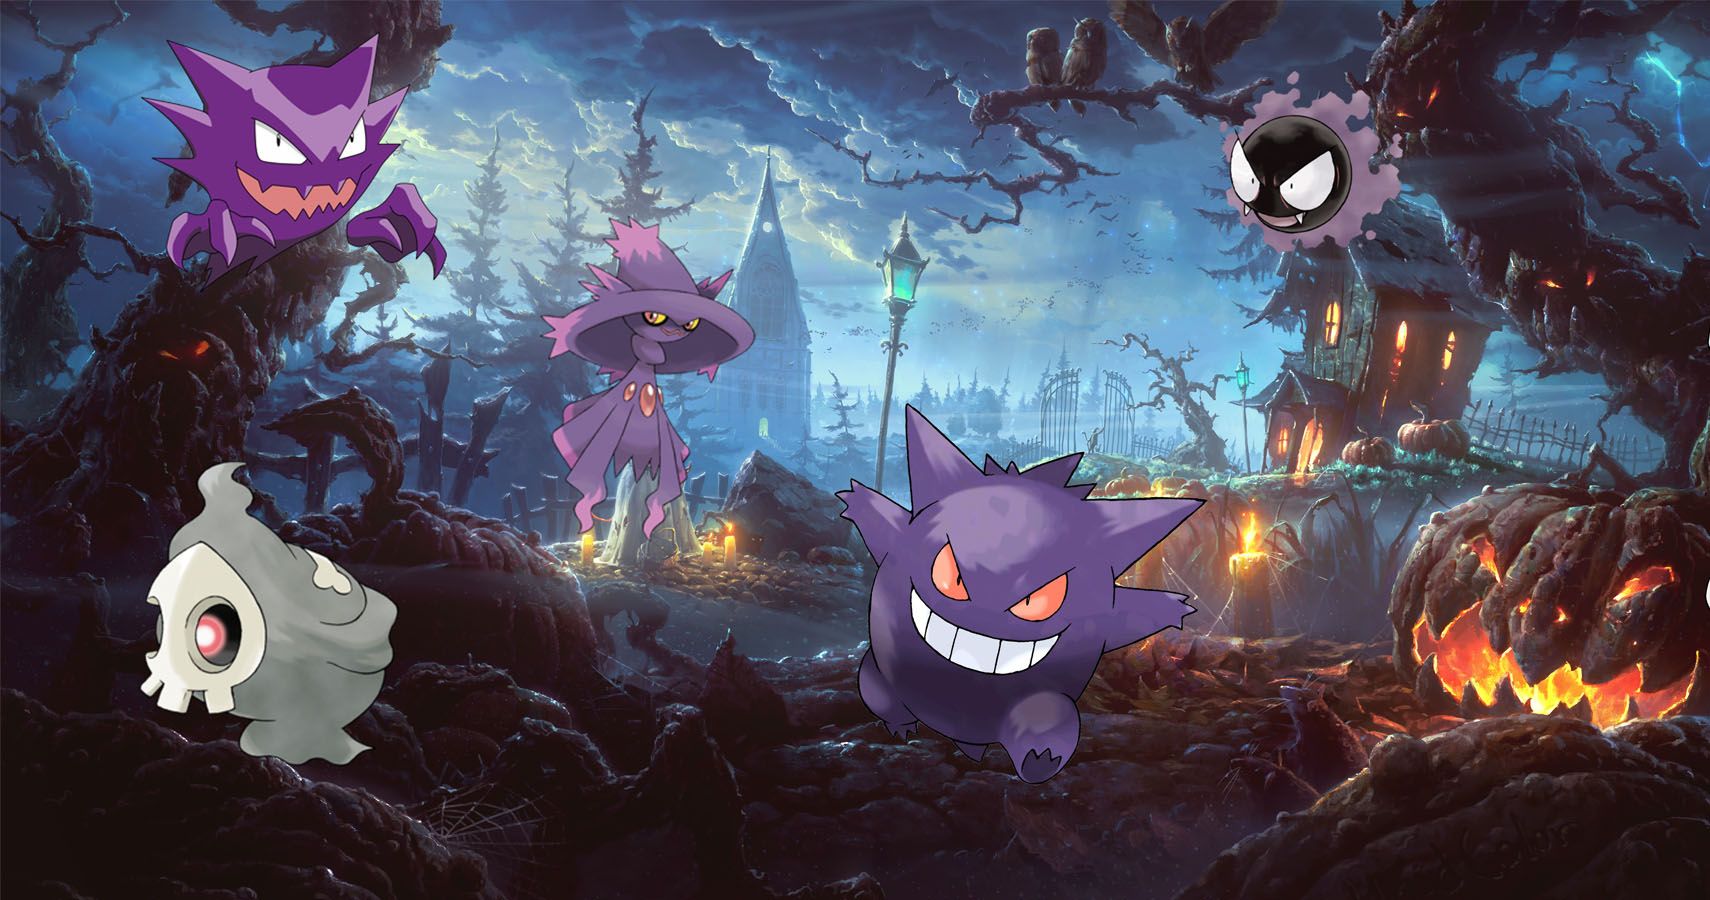 pok-mons-lavender-town-revealed-just-in-time-for-halloween-pokemonwe